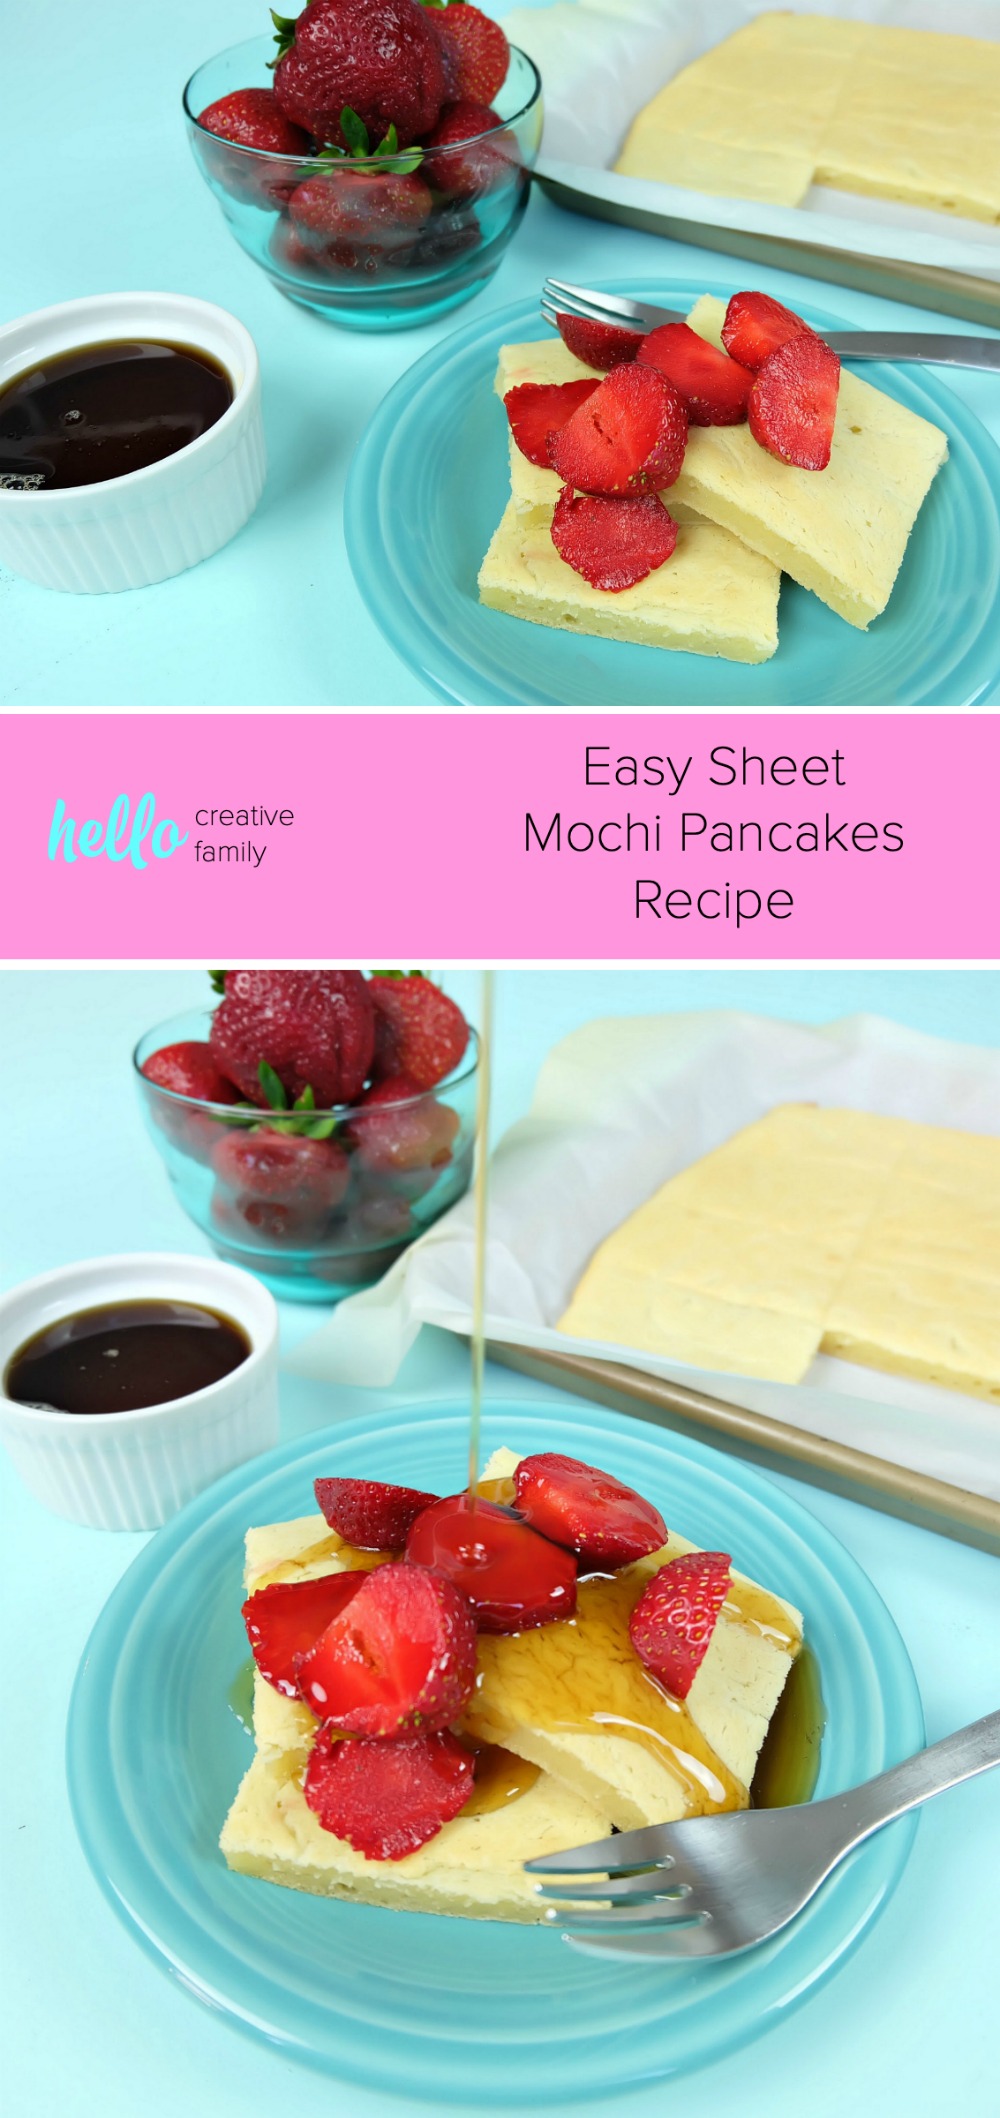 We've taken our favorite Japanese candy and turned it into and quick and delicious breakfast with our easy sheet mochi pancakes recipe! With a mochi filling and a golden crust, your family won't be able to get enough of these pancakes! Make the batter in less than 5 minutes and then and pop it in the oven for a low maintenance breakfast-- no pancake flipping required. Extras can be stored in the fridge for breakfast all week long! #Breakfast #mochi #pancakes #recipe